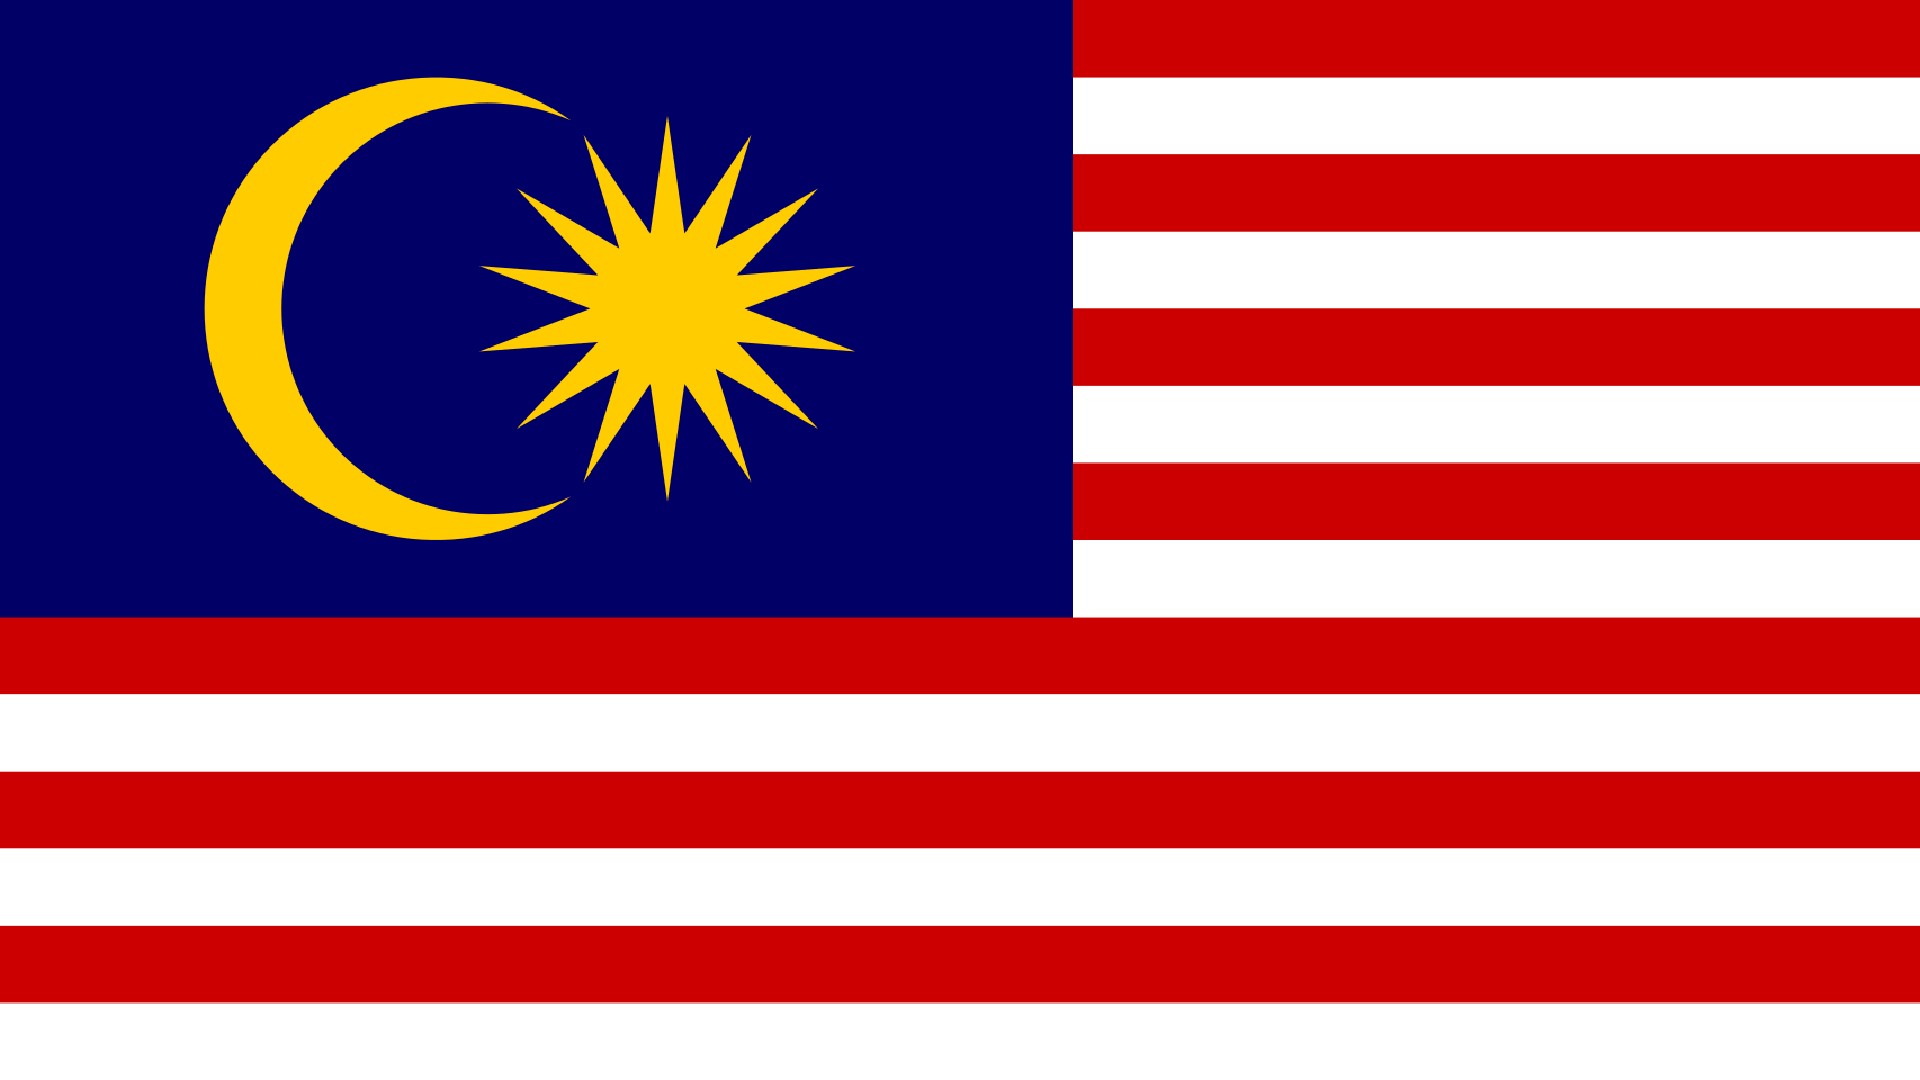 An image of the flag of Malaysia